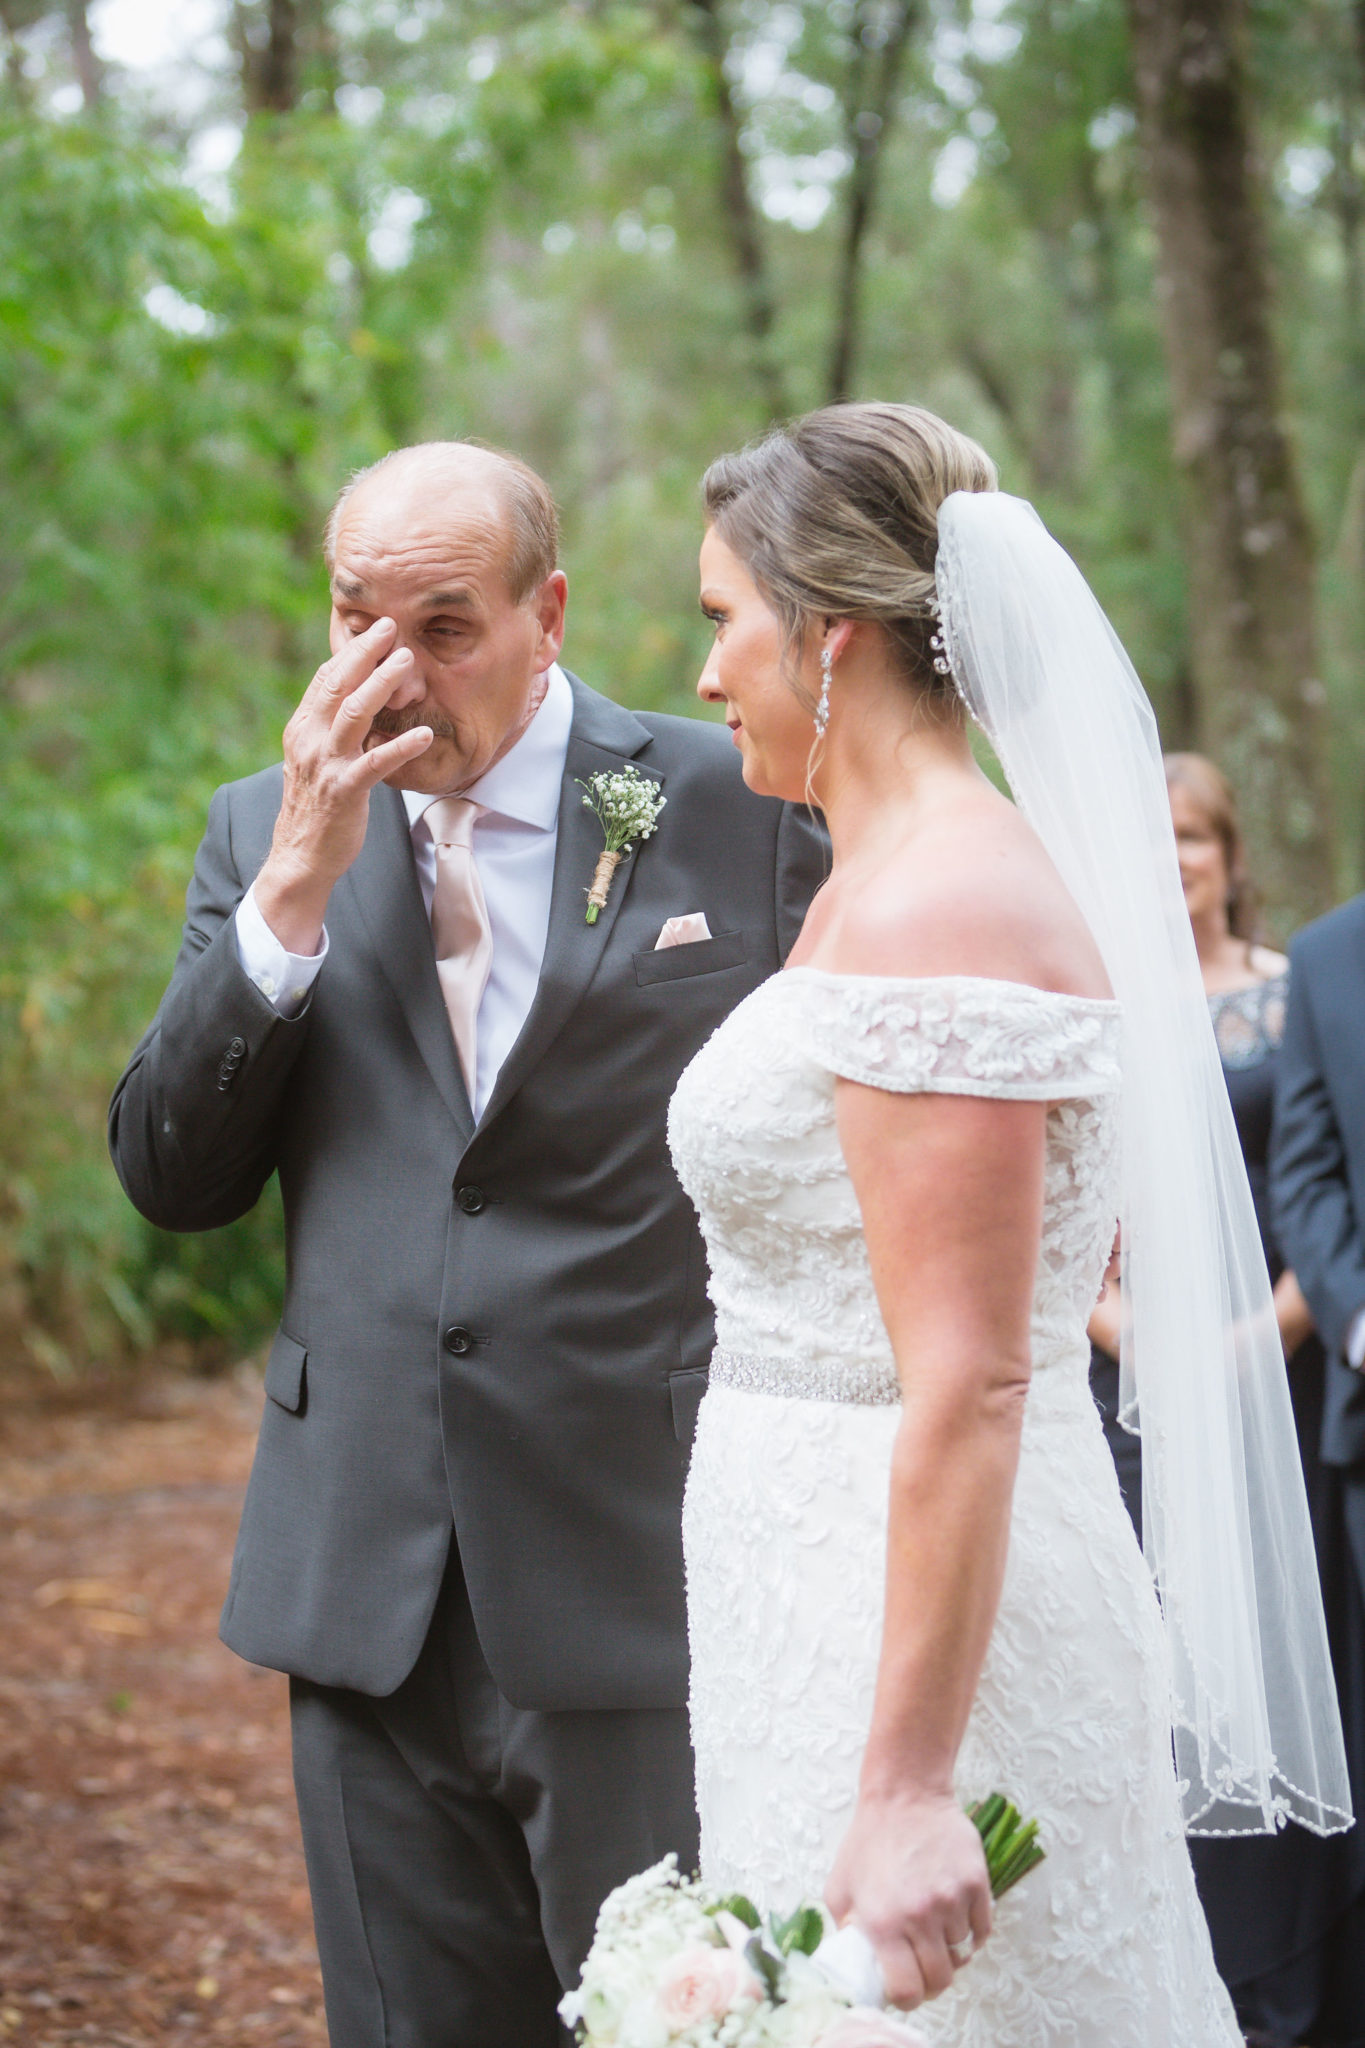 Father of the bride in an emotional moment.